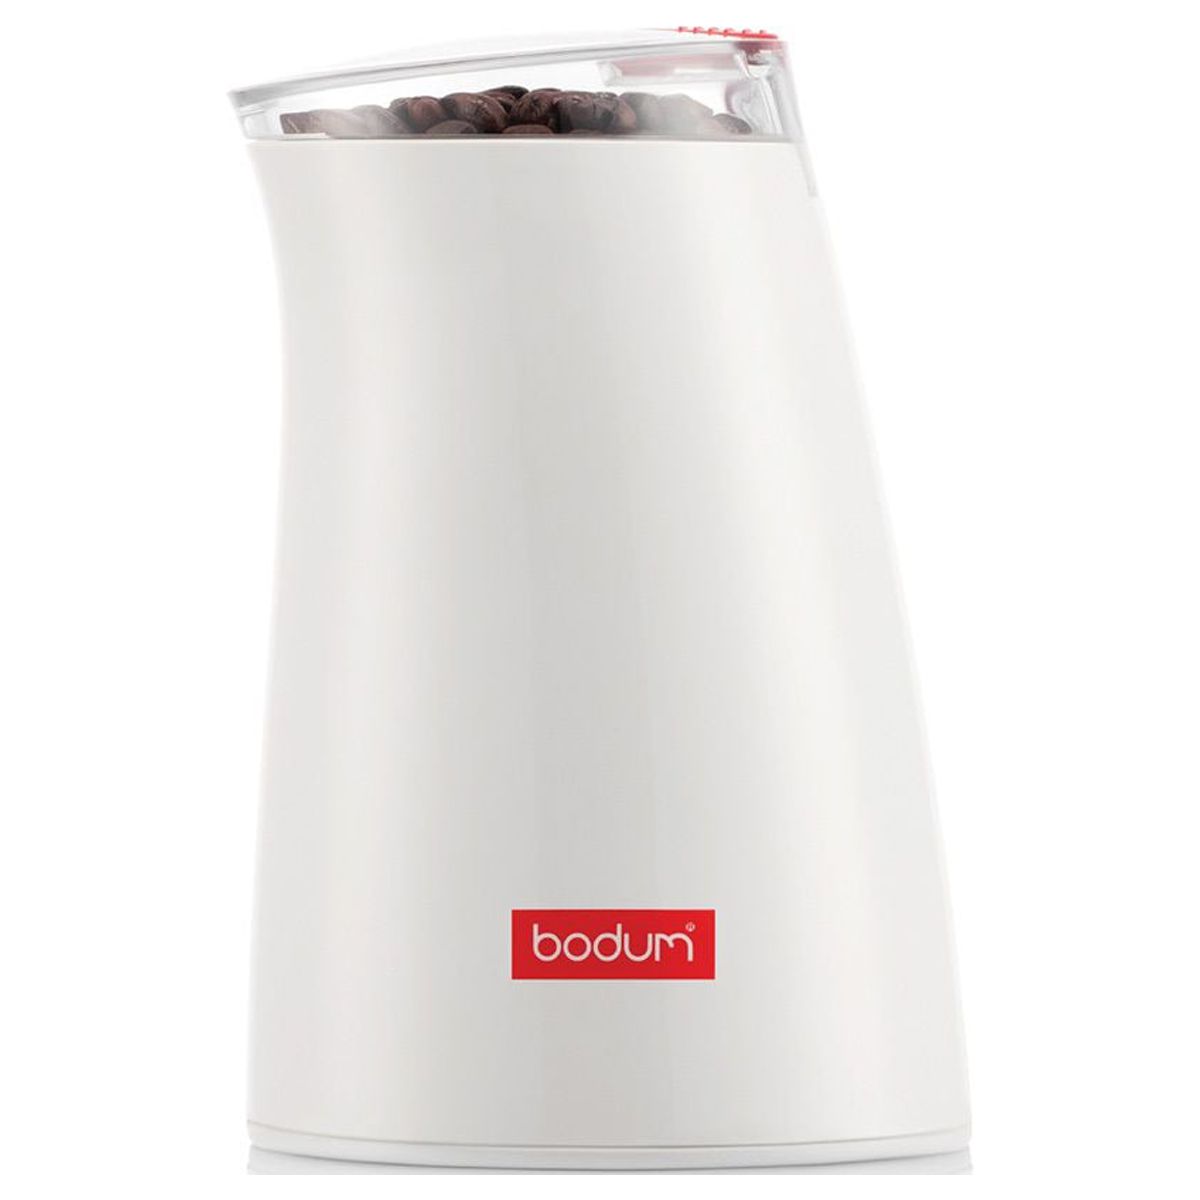 Bodum C-Mill Electric Coffee Grinder, White, New - image 1 of 9